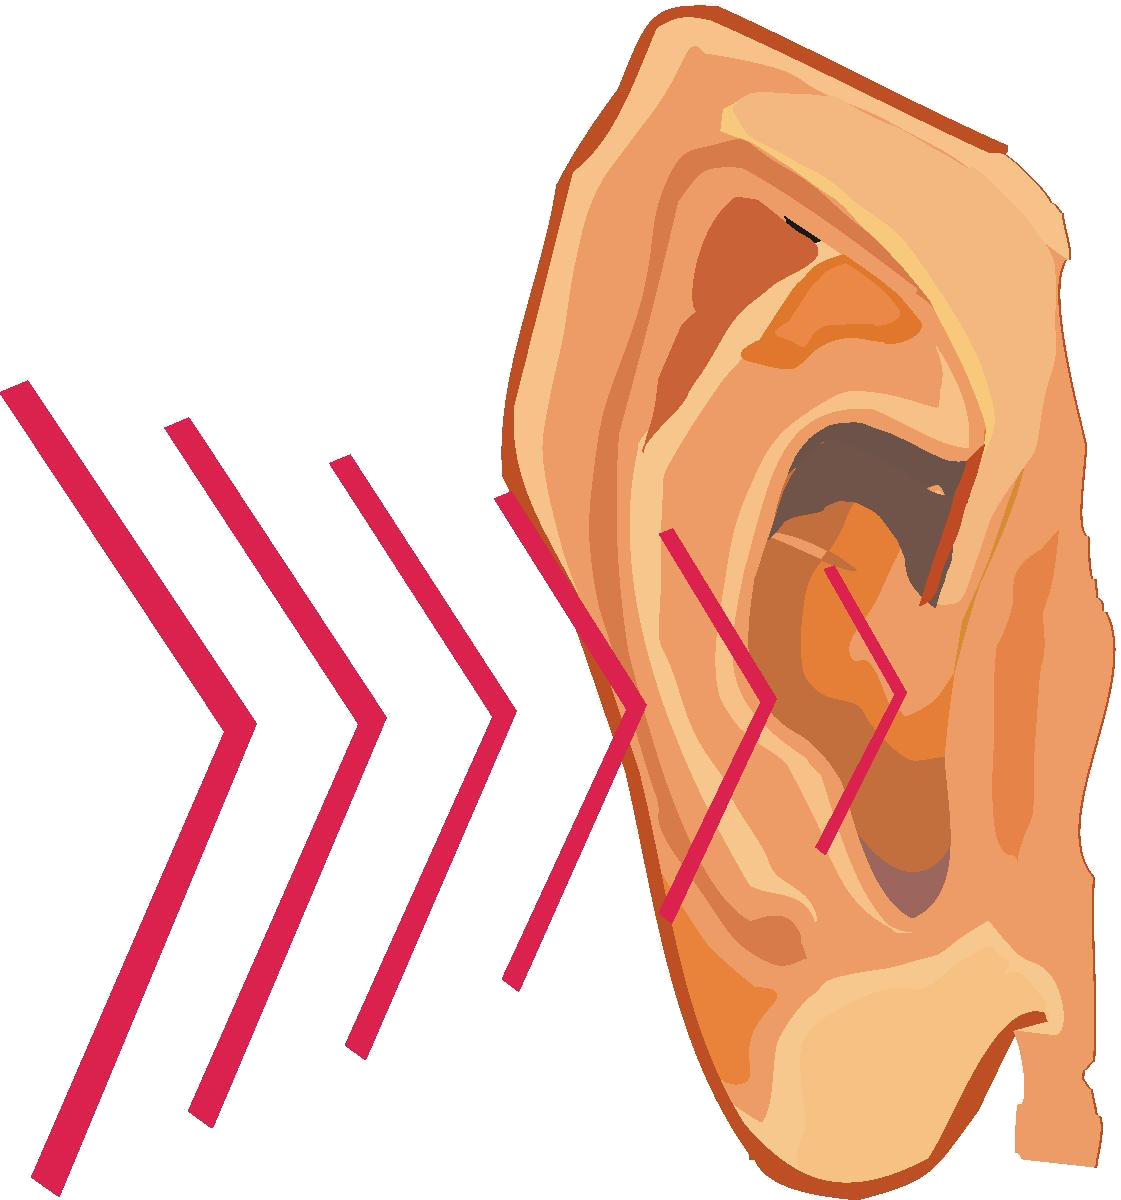 Ear sound waves clipart